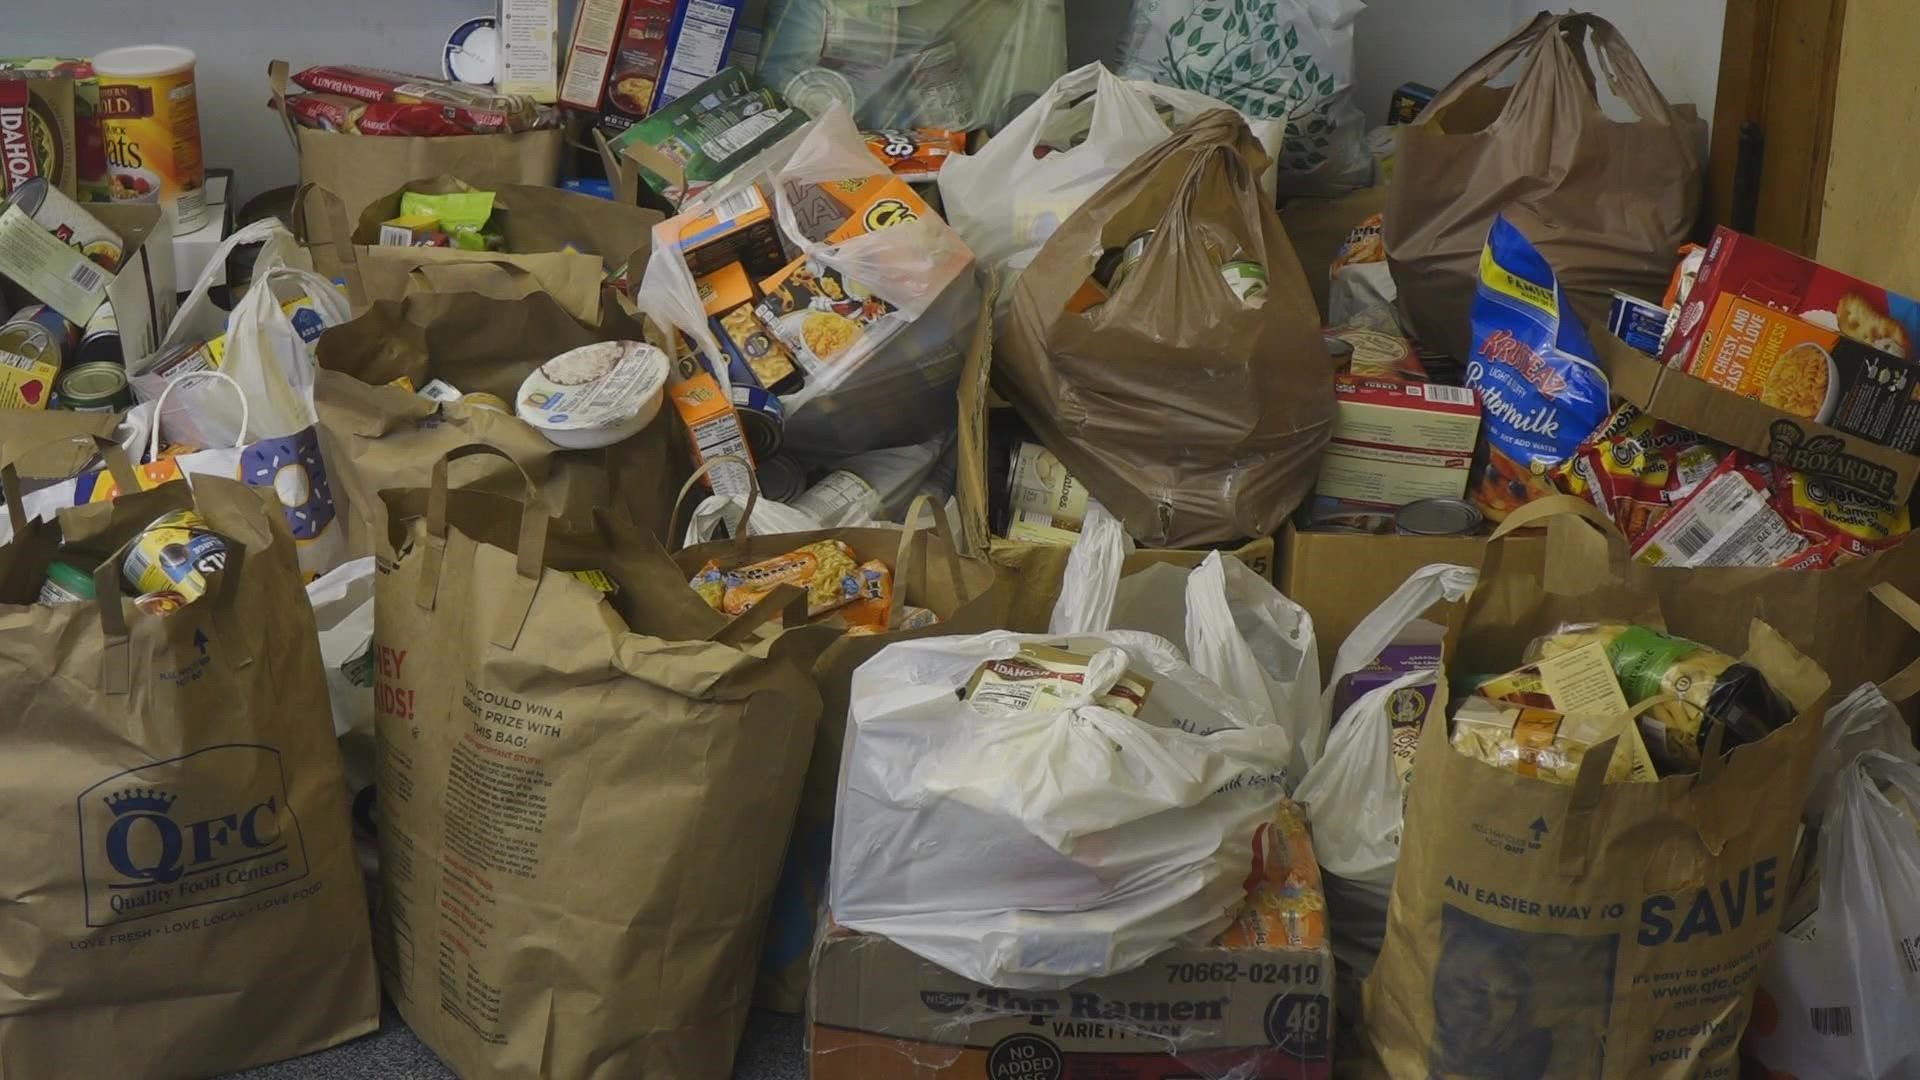 Donors can place items in the collection bin of their choice. One says “dinner” and the other says “pardon.” The items will be donated to a local food bank.